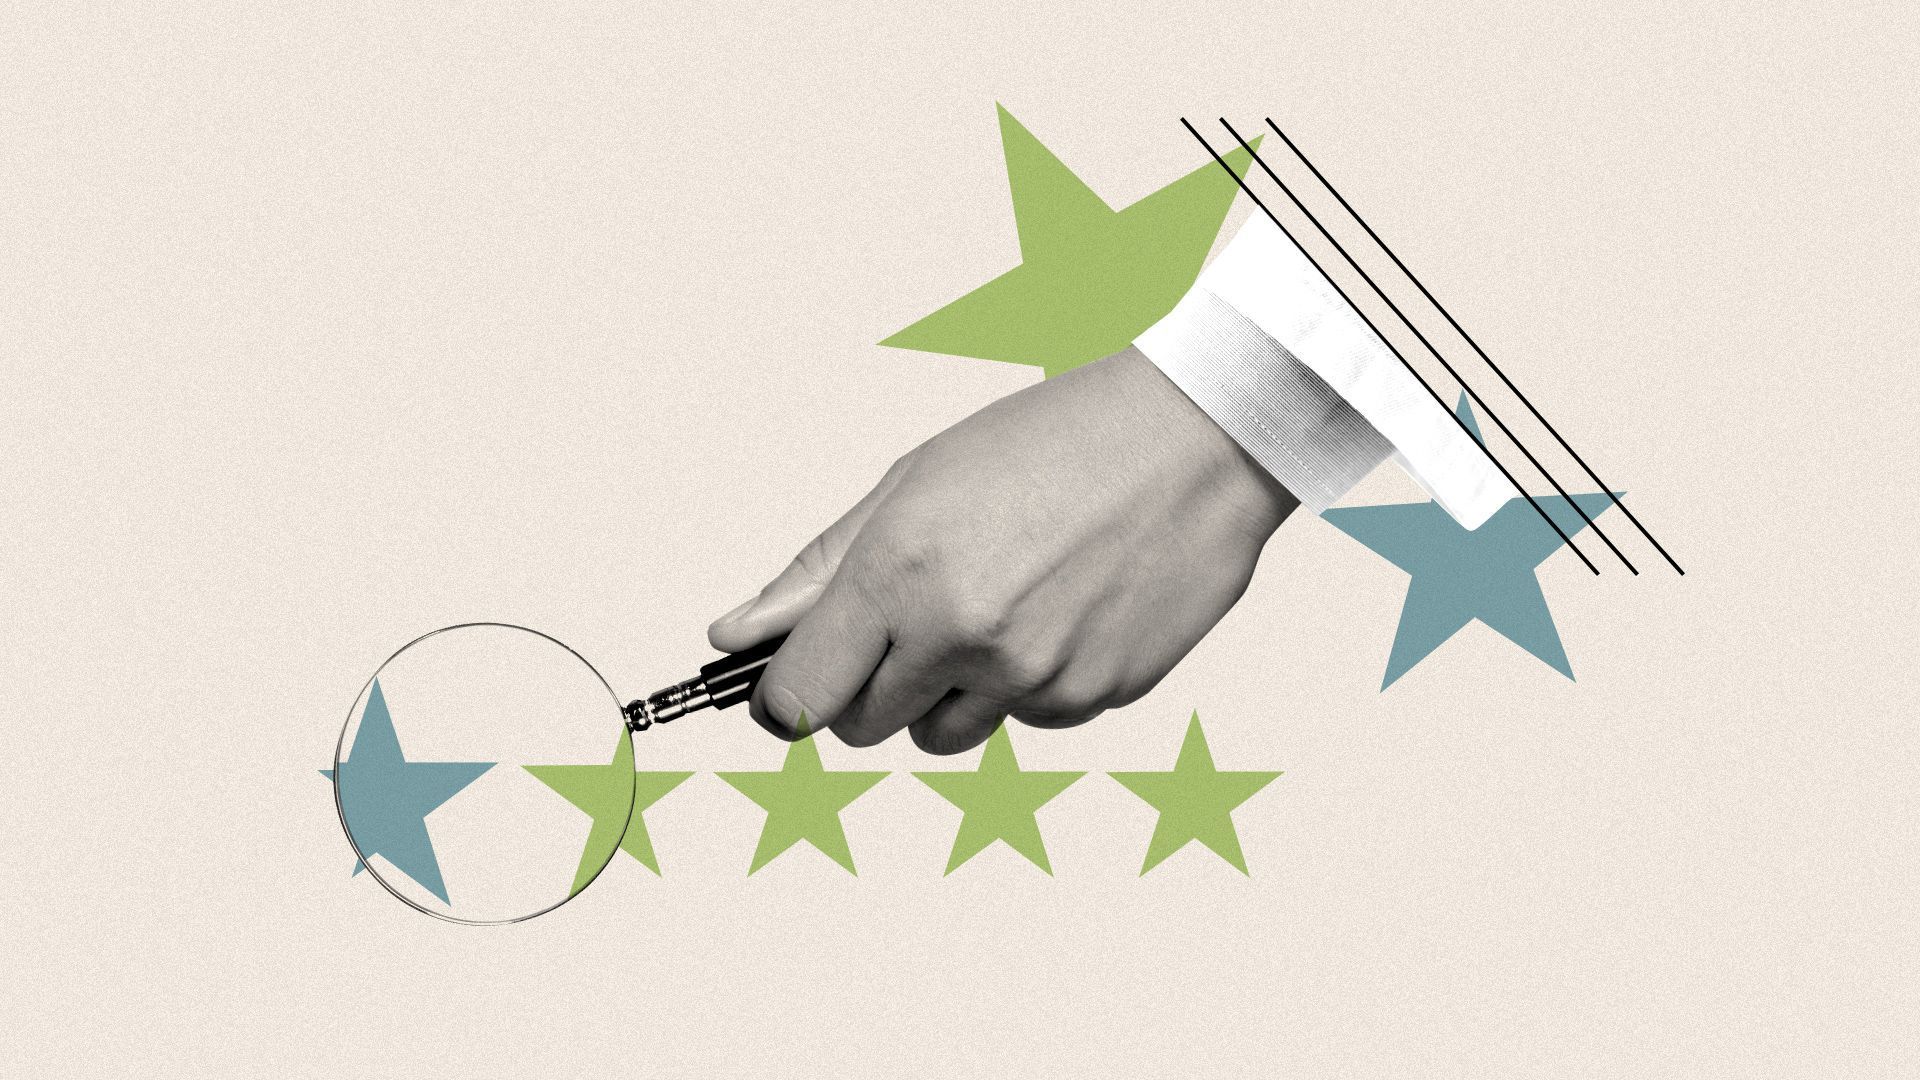 An illustration of a magnifying glass examining review stars.